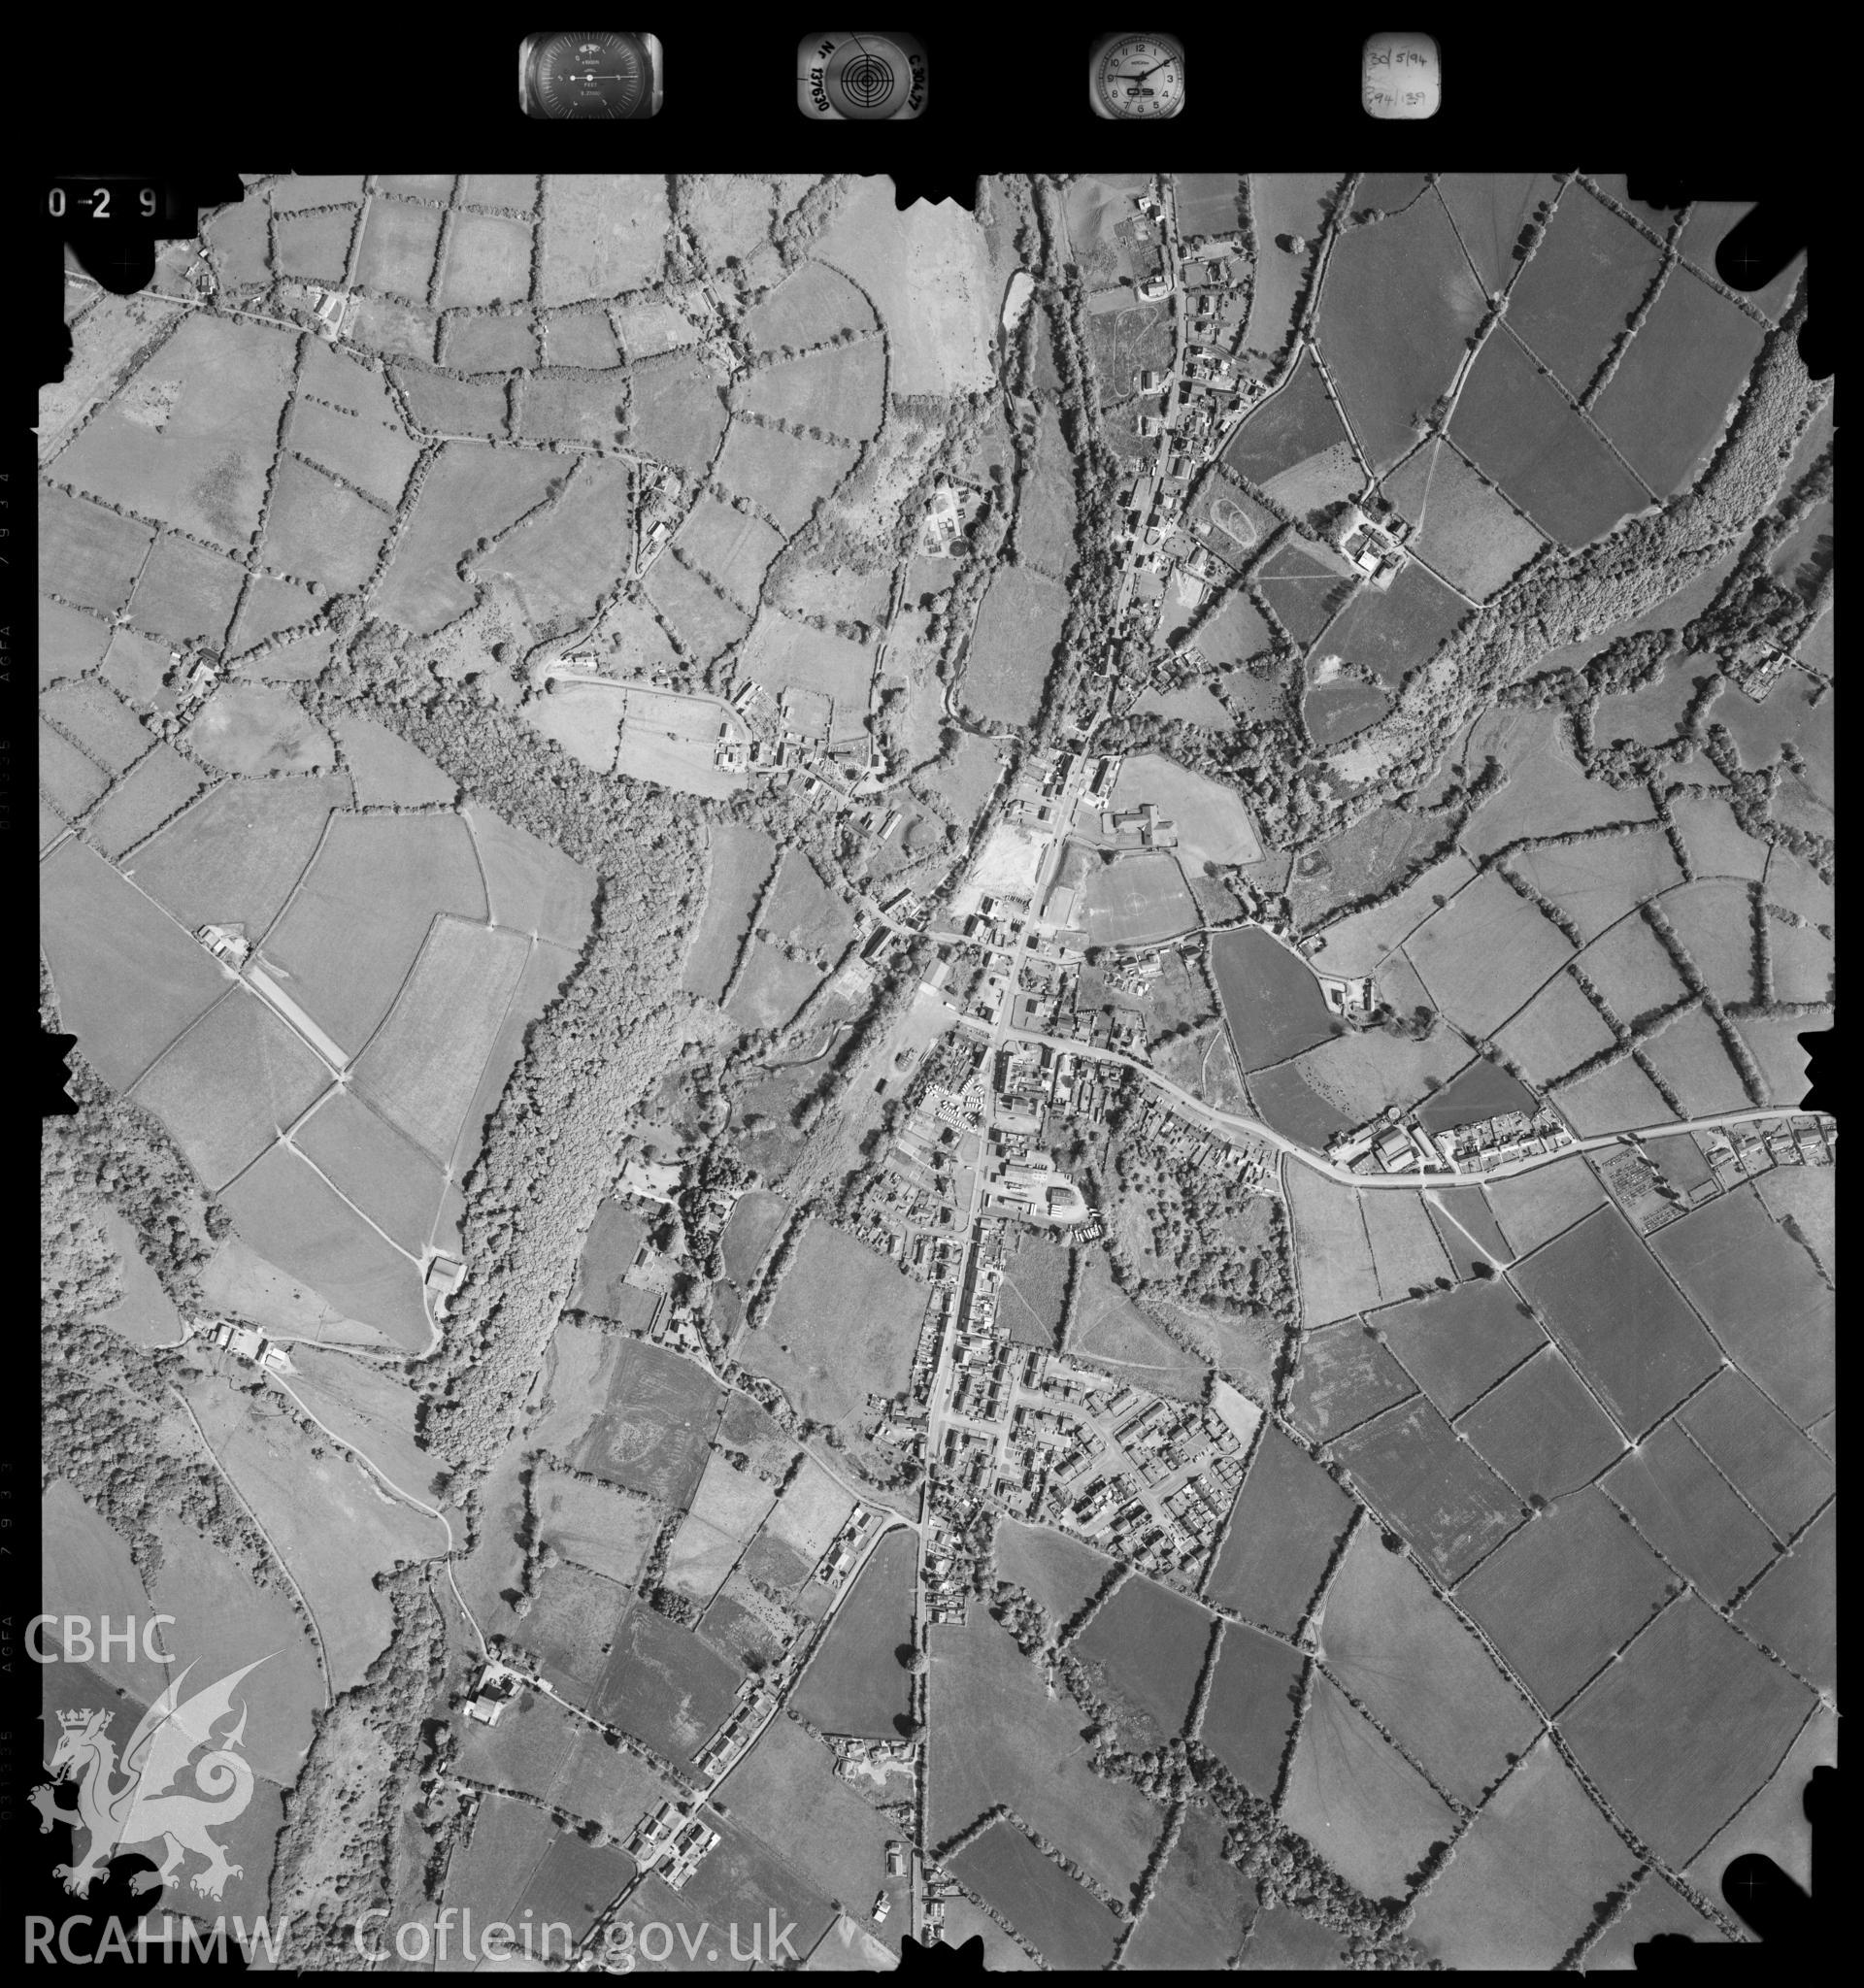 Digitized copy of an aerial photograph showing the Pencader area, taken by Ordnance Survey, 1994.